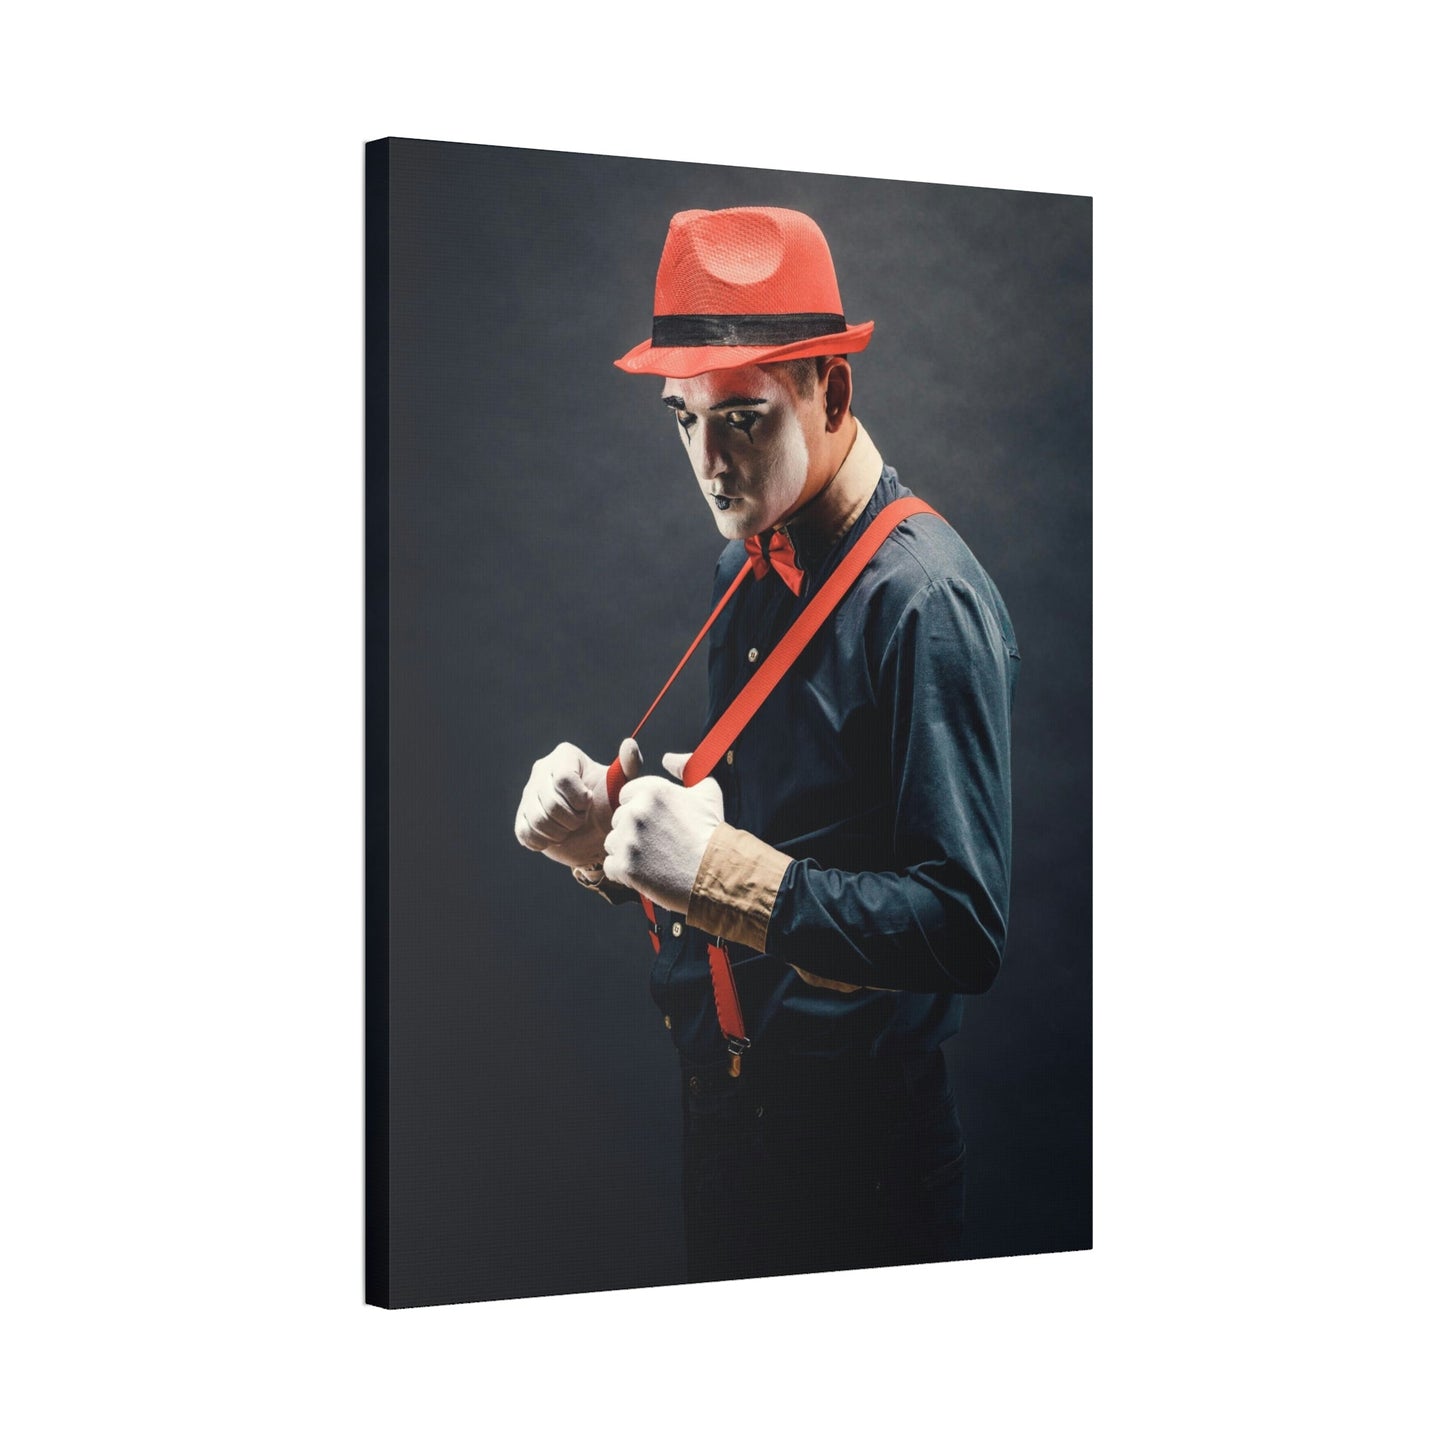 The Comedian's Art: Captivating Print on Framed Canvas for Your Home